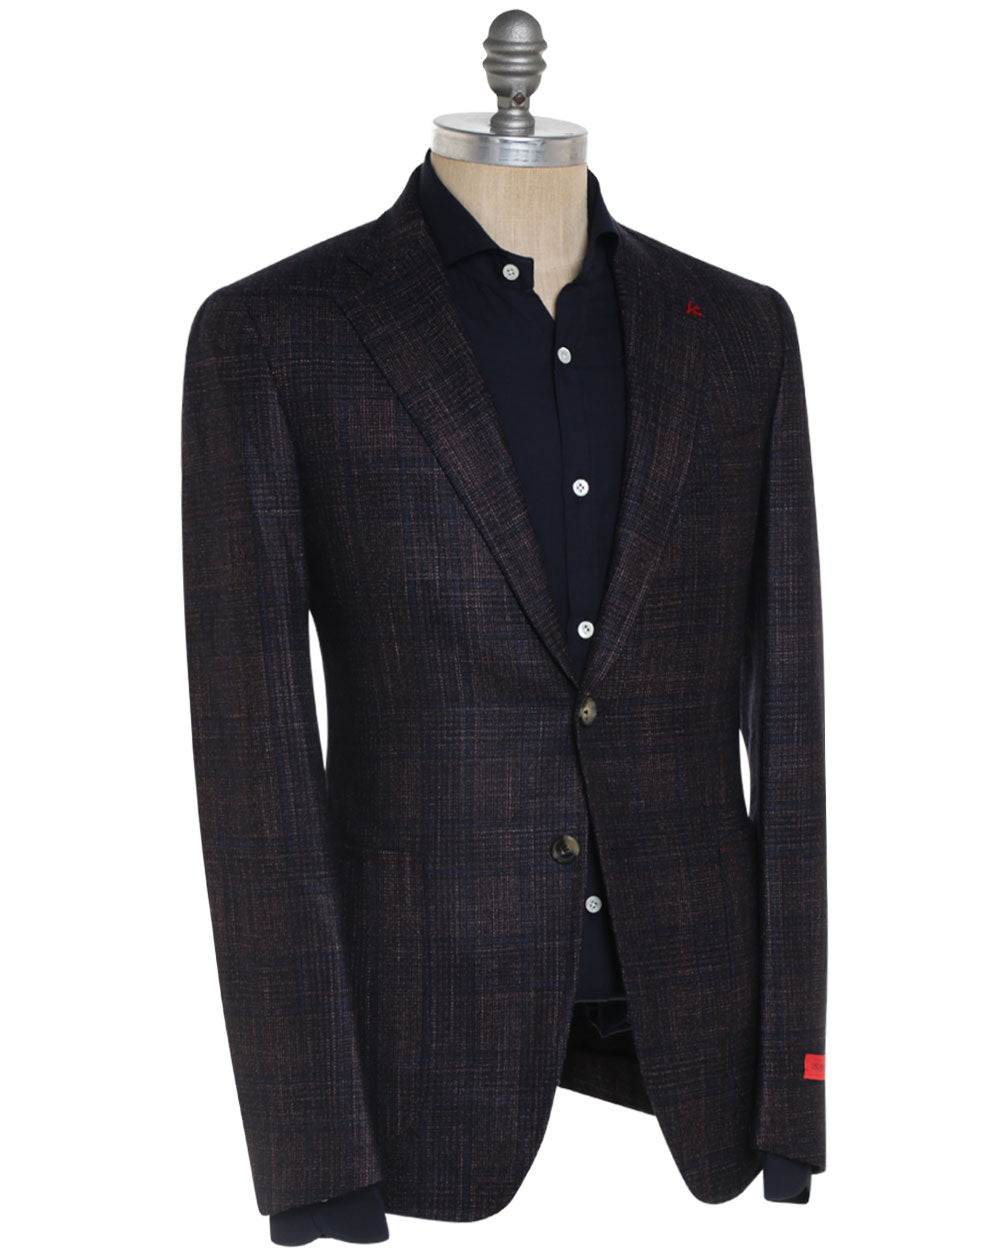 Navy and Rust Wool Blend Plaid Sportcoat